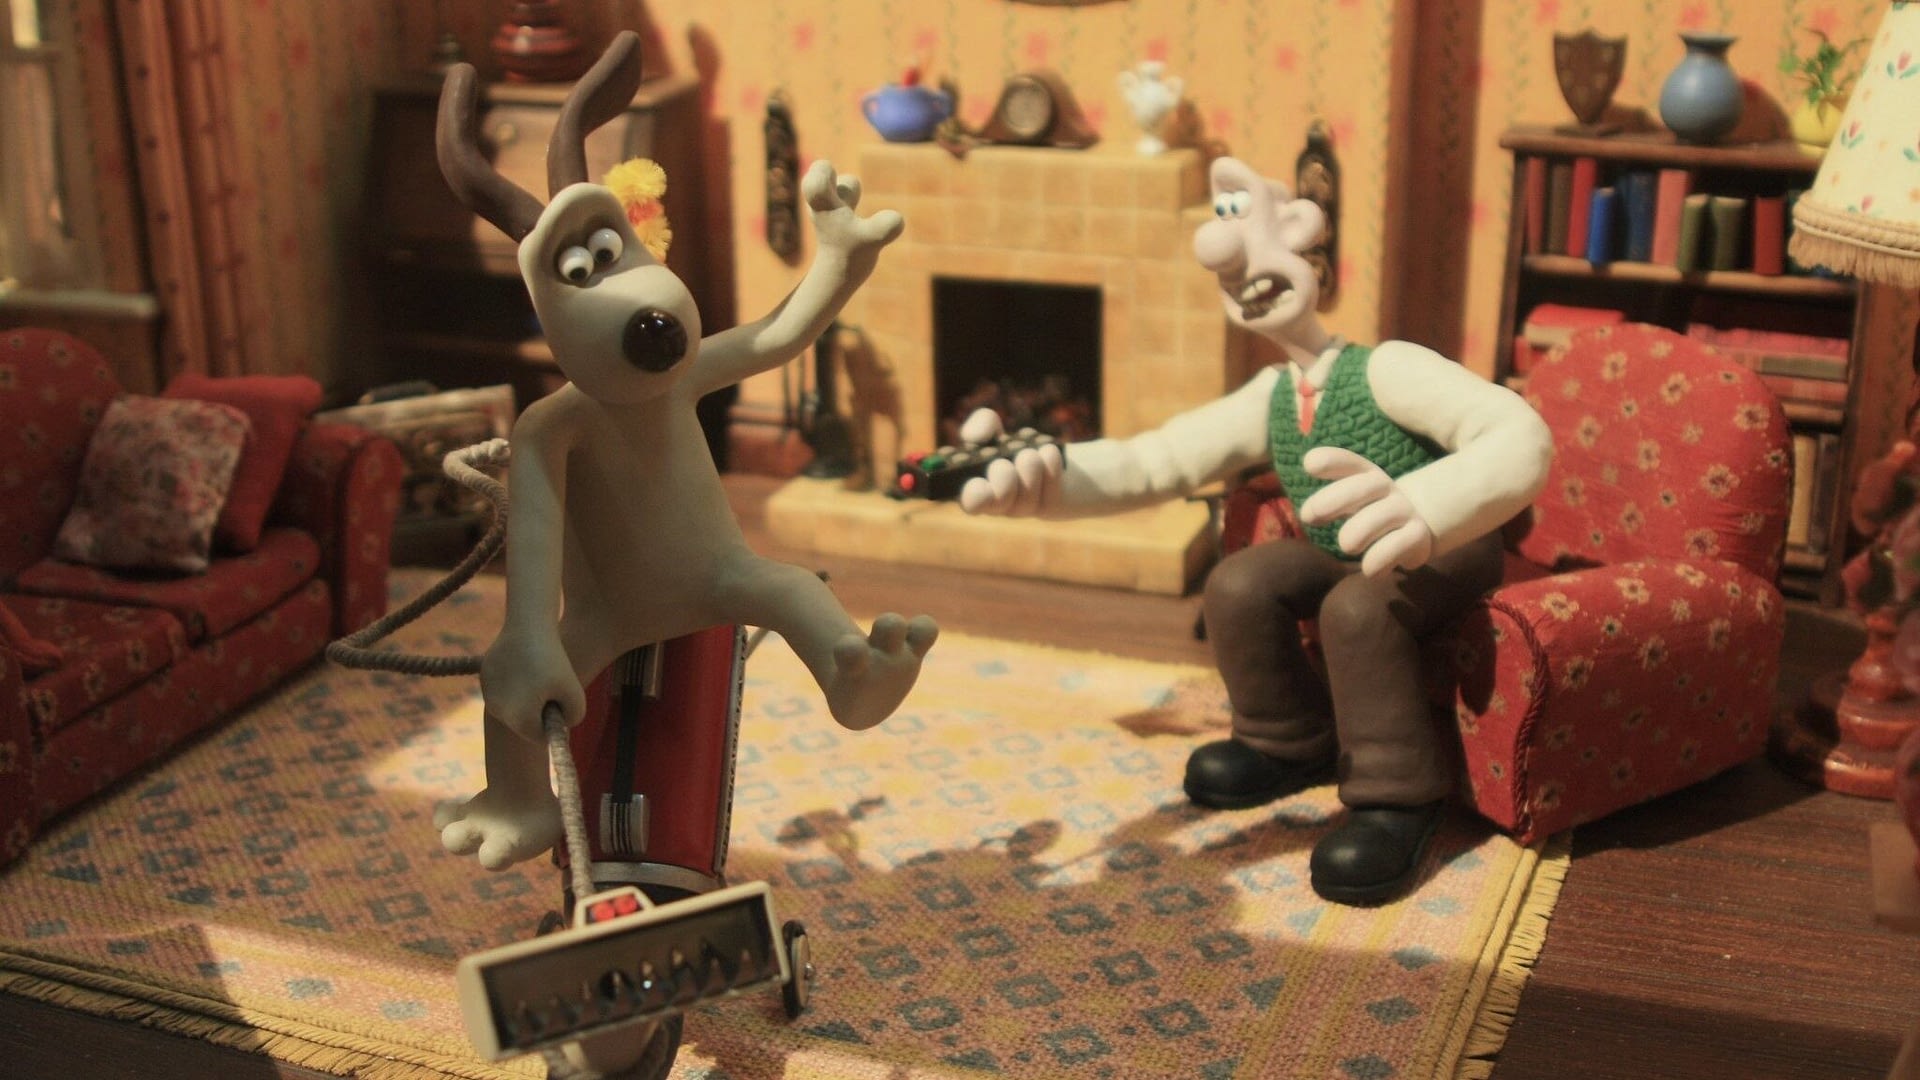 Image: Still shot of Wallace and Gromit, some of the most famous stop motion animation characters